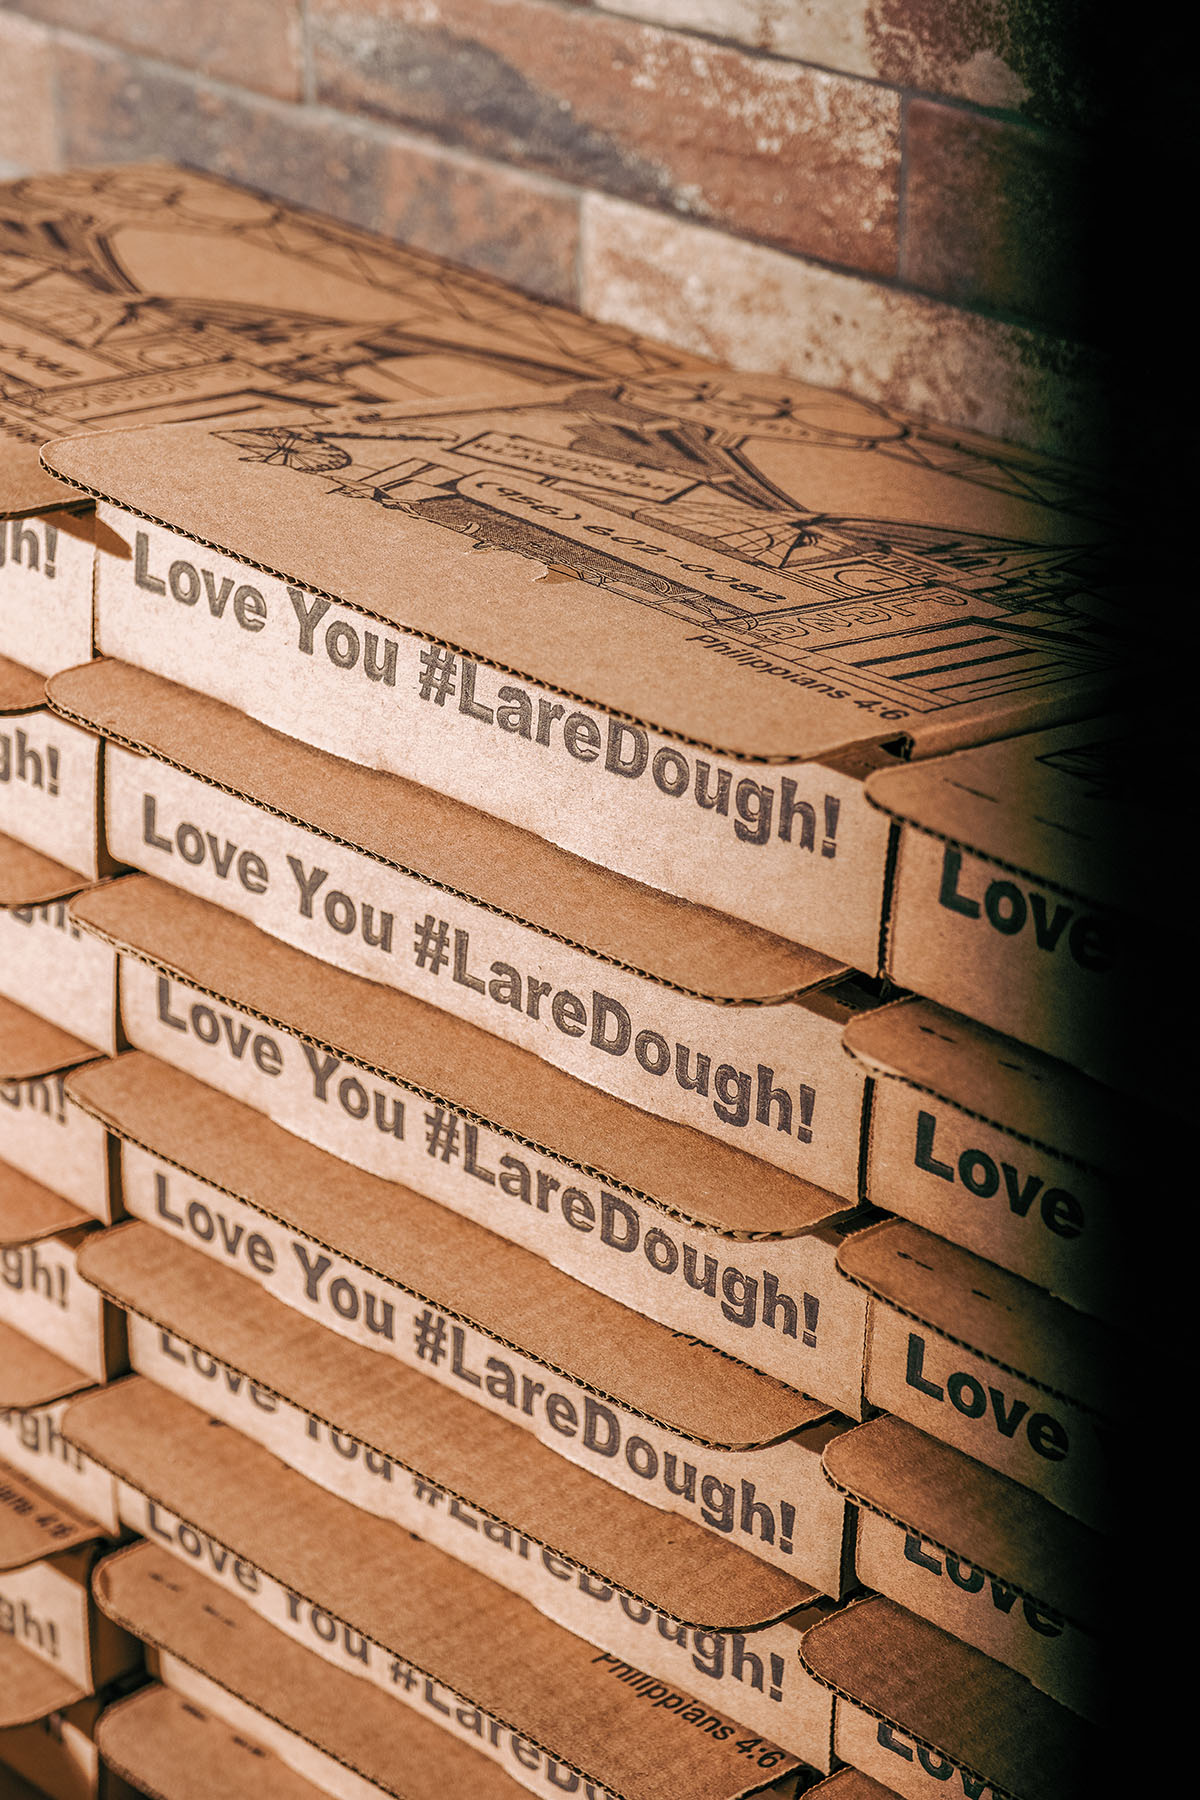 A stack of cardboard pizza boxes labeled with 